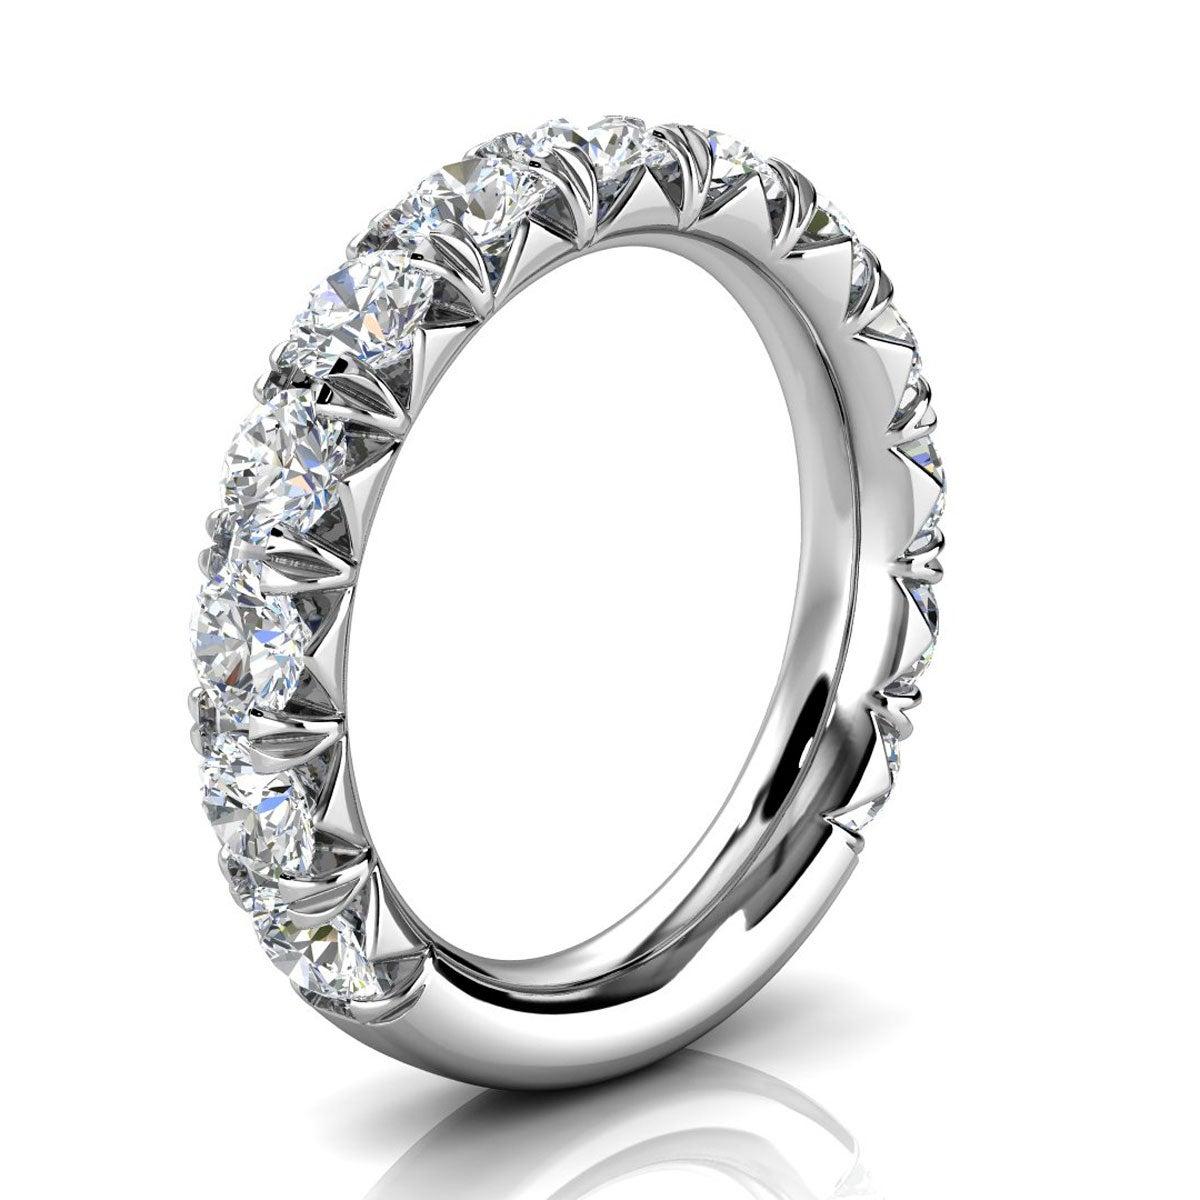 For Sale:  18k White Gold GIA French Pave Diamond Ring '2 Ct. Tw' 2